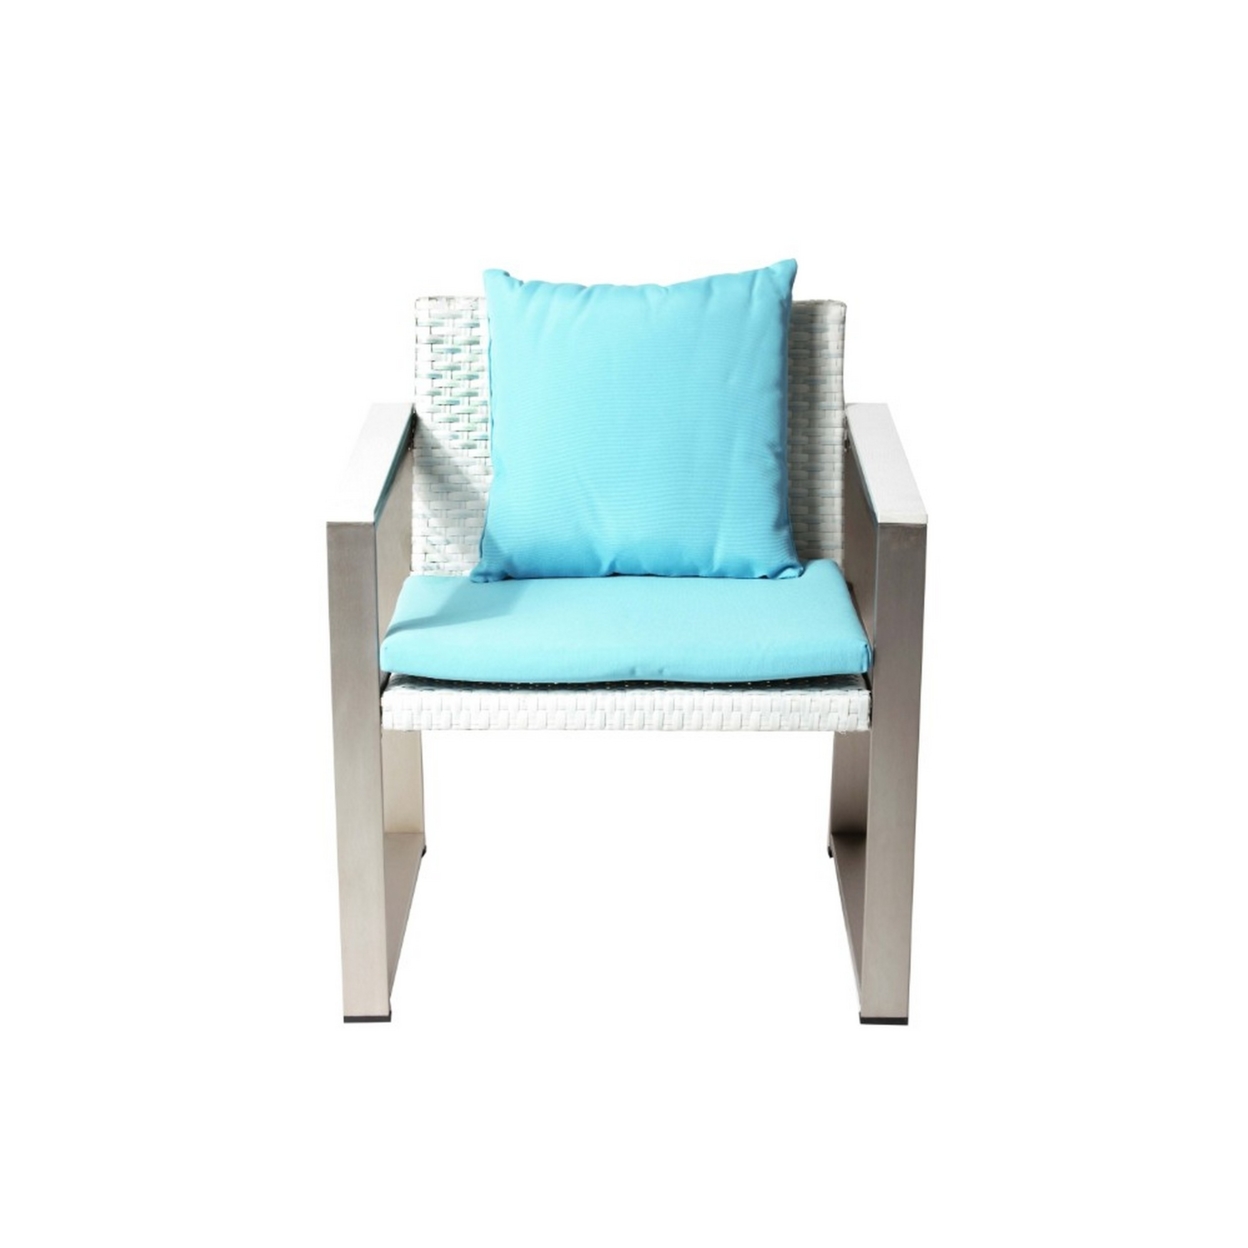 Anodized Aluminum Upholstered Cushioned Chair With Rattan, White Turquoise- Saltoro Sherpi